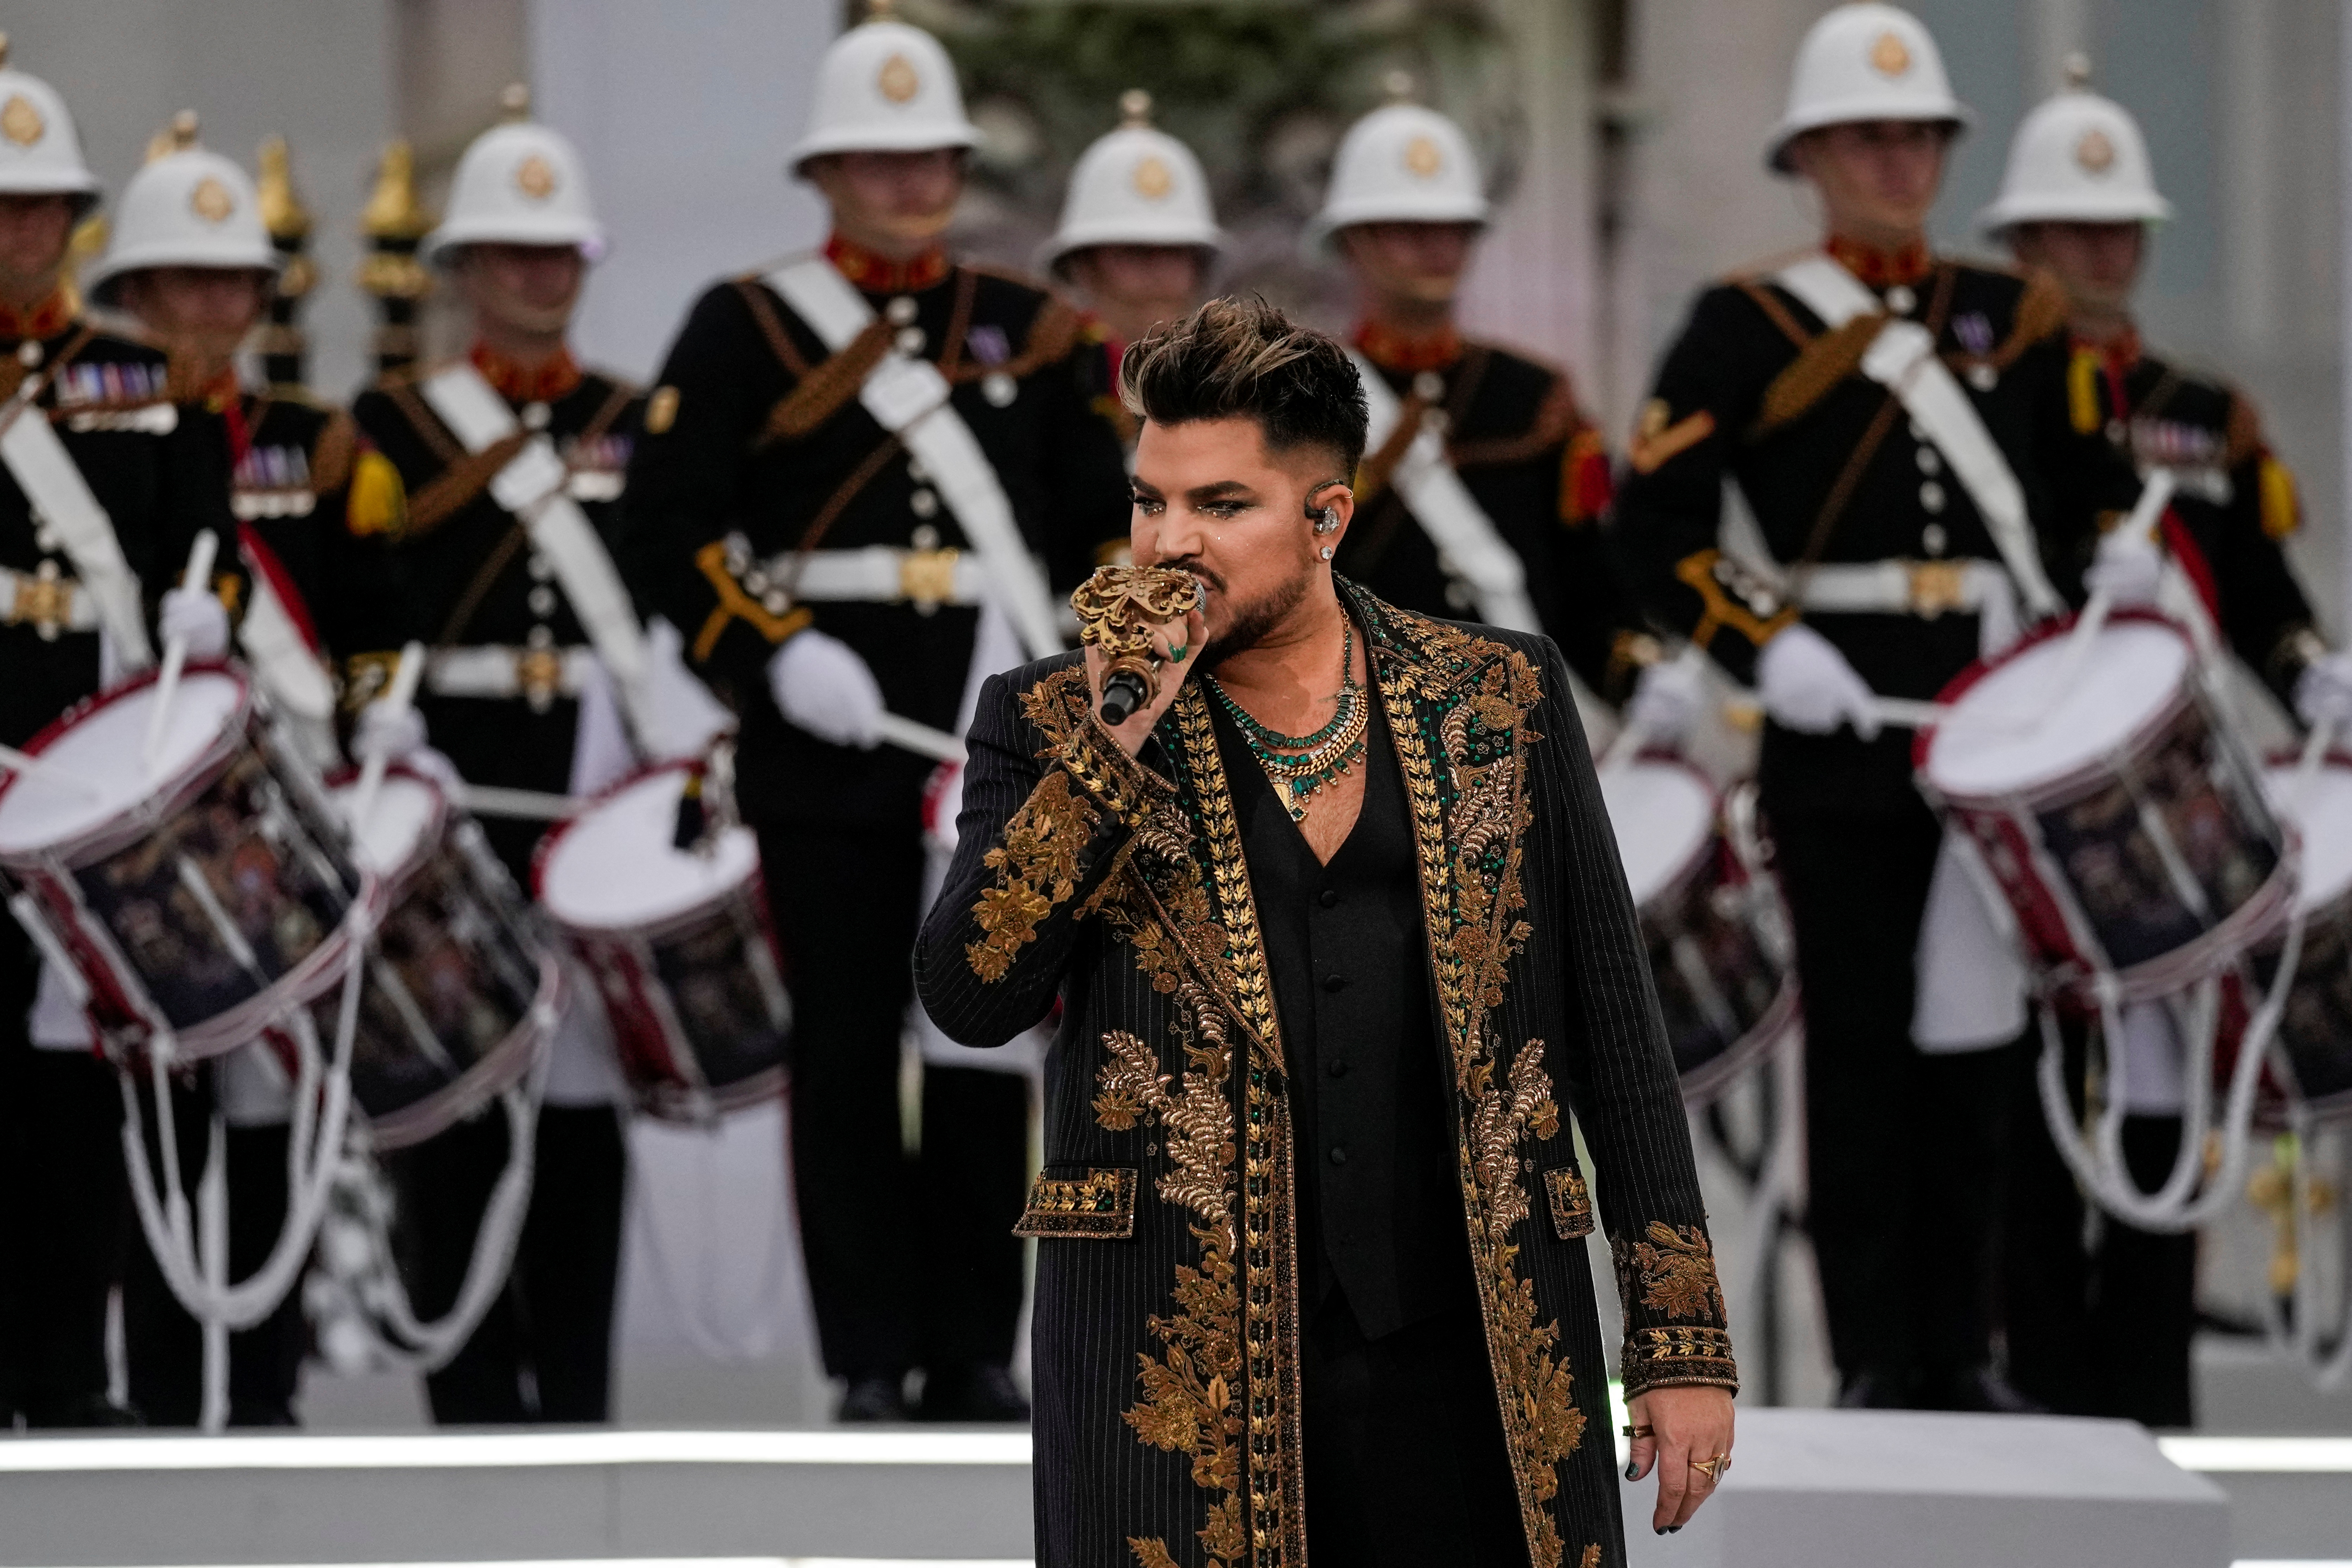 Adam Lambert, from Collaboration "The Queen + Adam Lambert"performs with Royal Navy drummers at the Queen Elizabeth Platinum Jubilee Gala outside Buckingham Palace on June 4, 2022 (Alastair Grant/REUTERS)